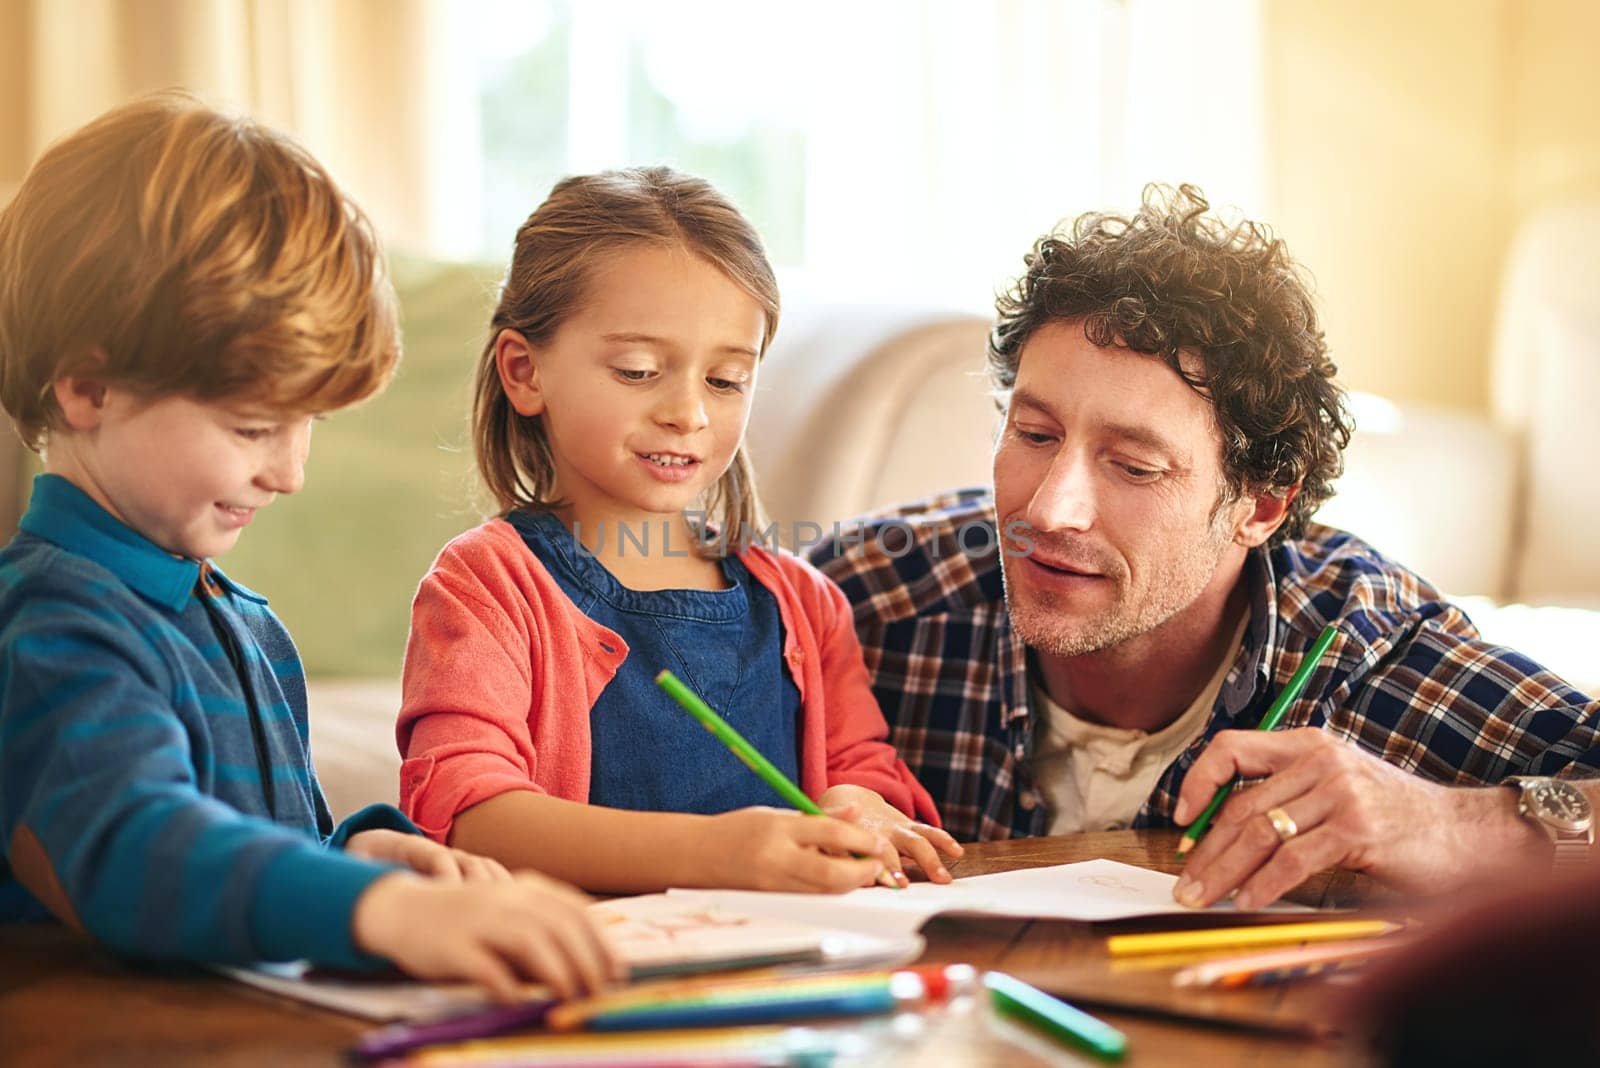 Father, kids and colour pencils for parenthood, fun learning and bonding on holiday or weekend. Dad, children and sibling with book stationery in lounge for drawing indoor activities with in home.